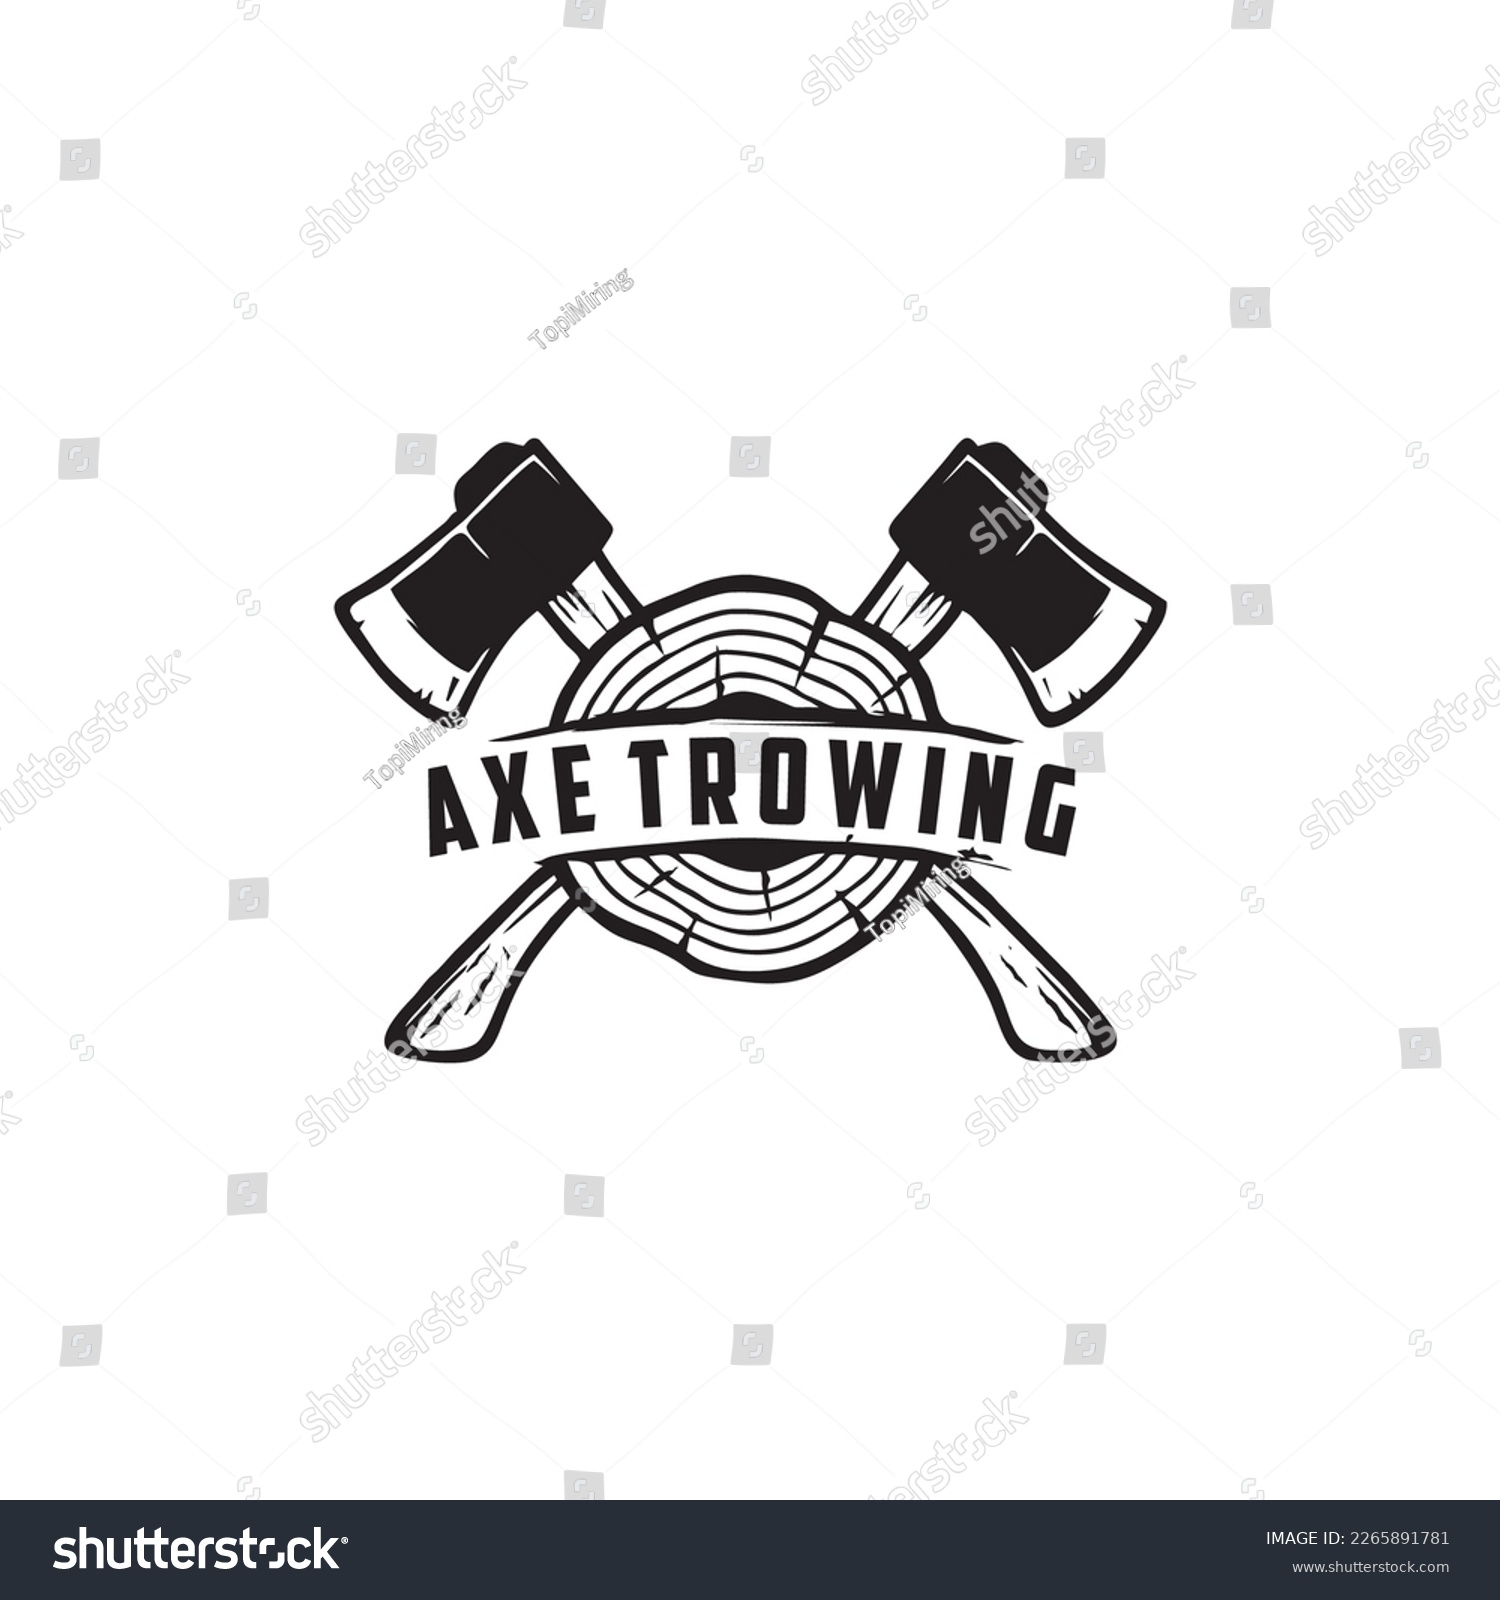 SVG of ax and wood throwing illustration logo. elegant, classic, simple and easy to apply
 svg